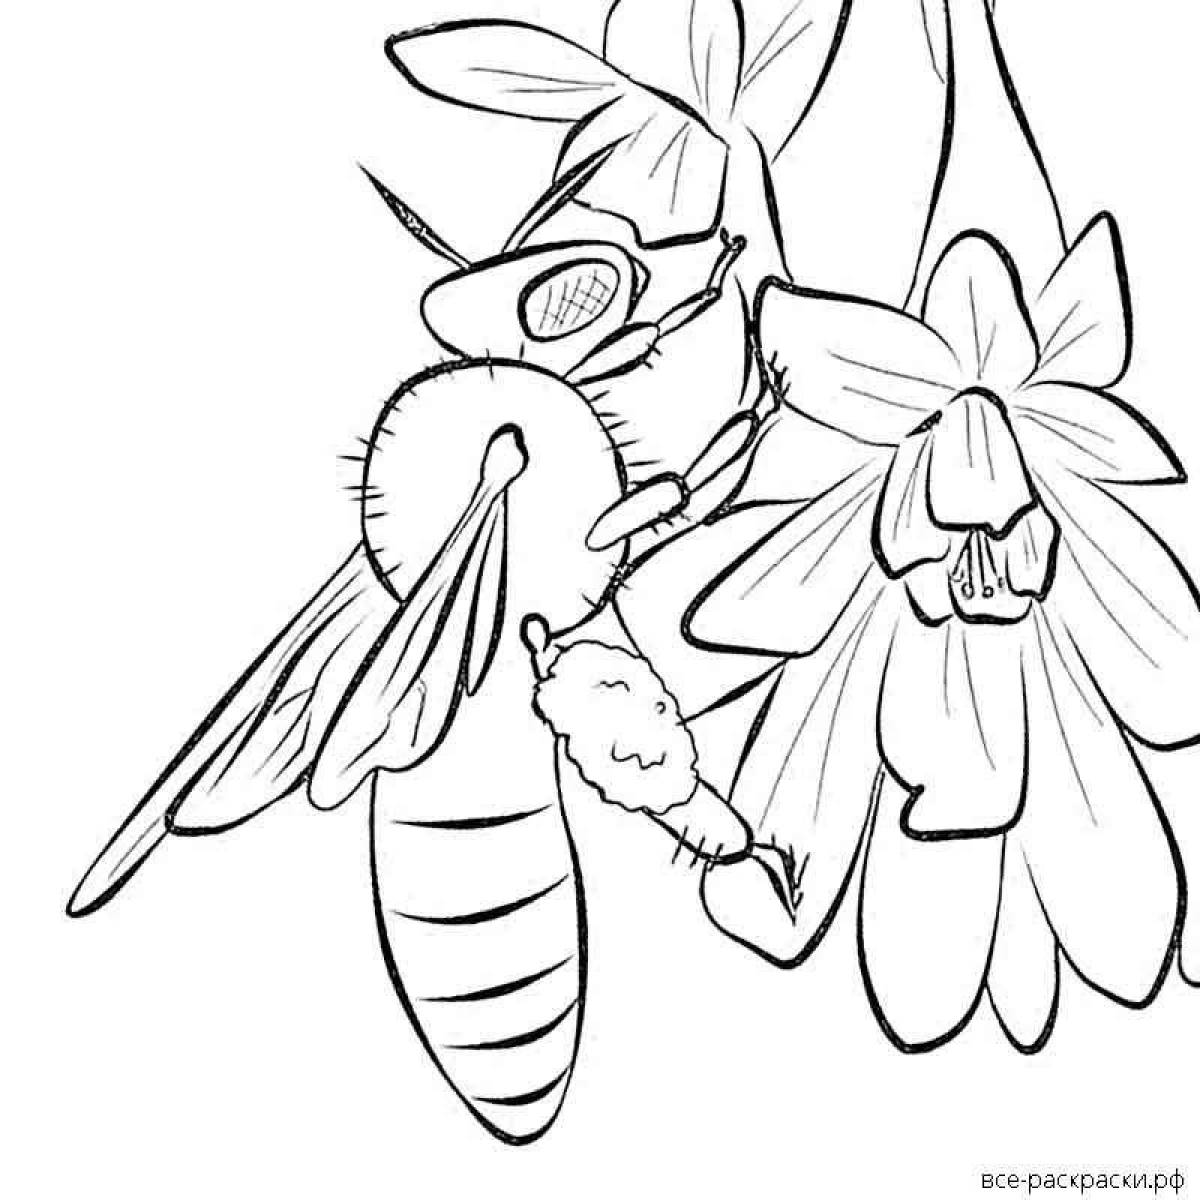 Adorable lady bee coloring page